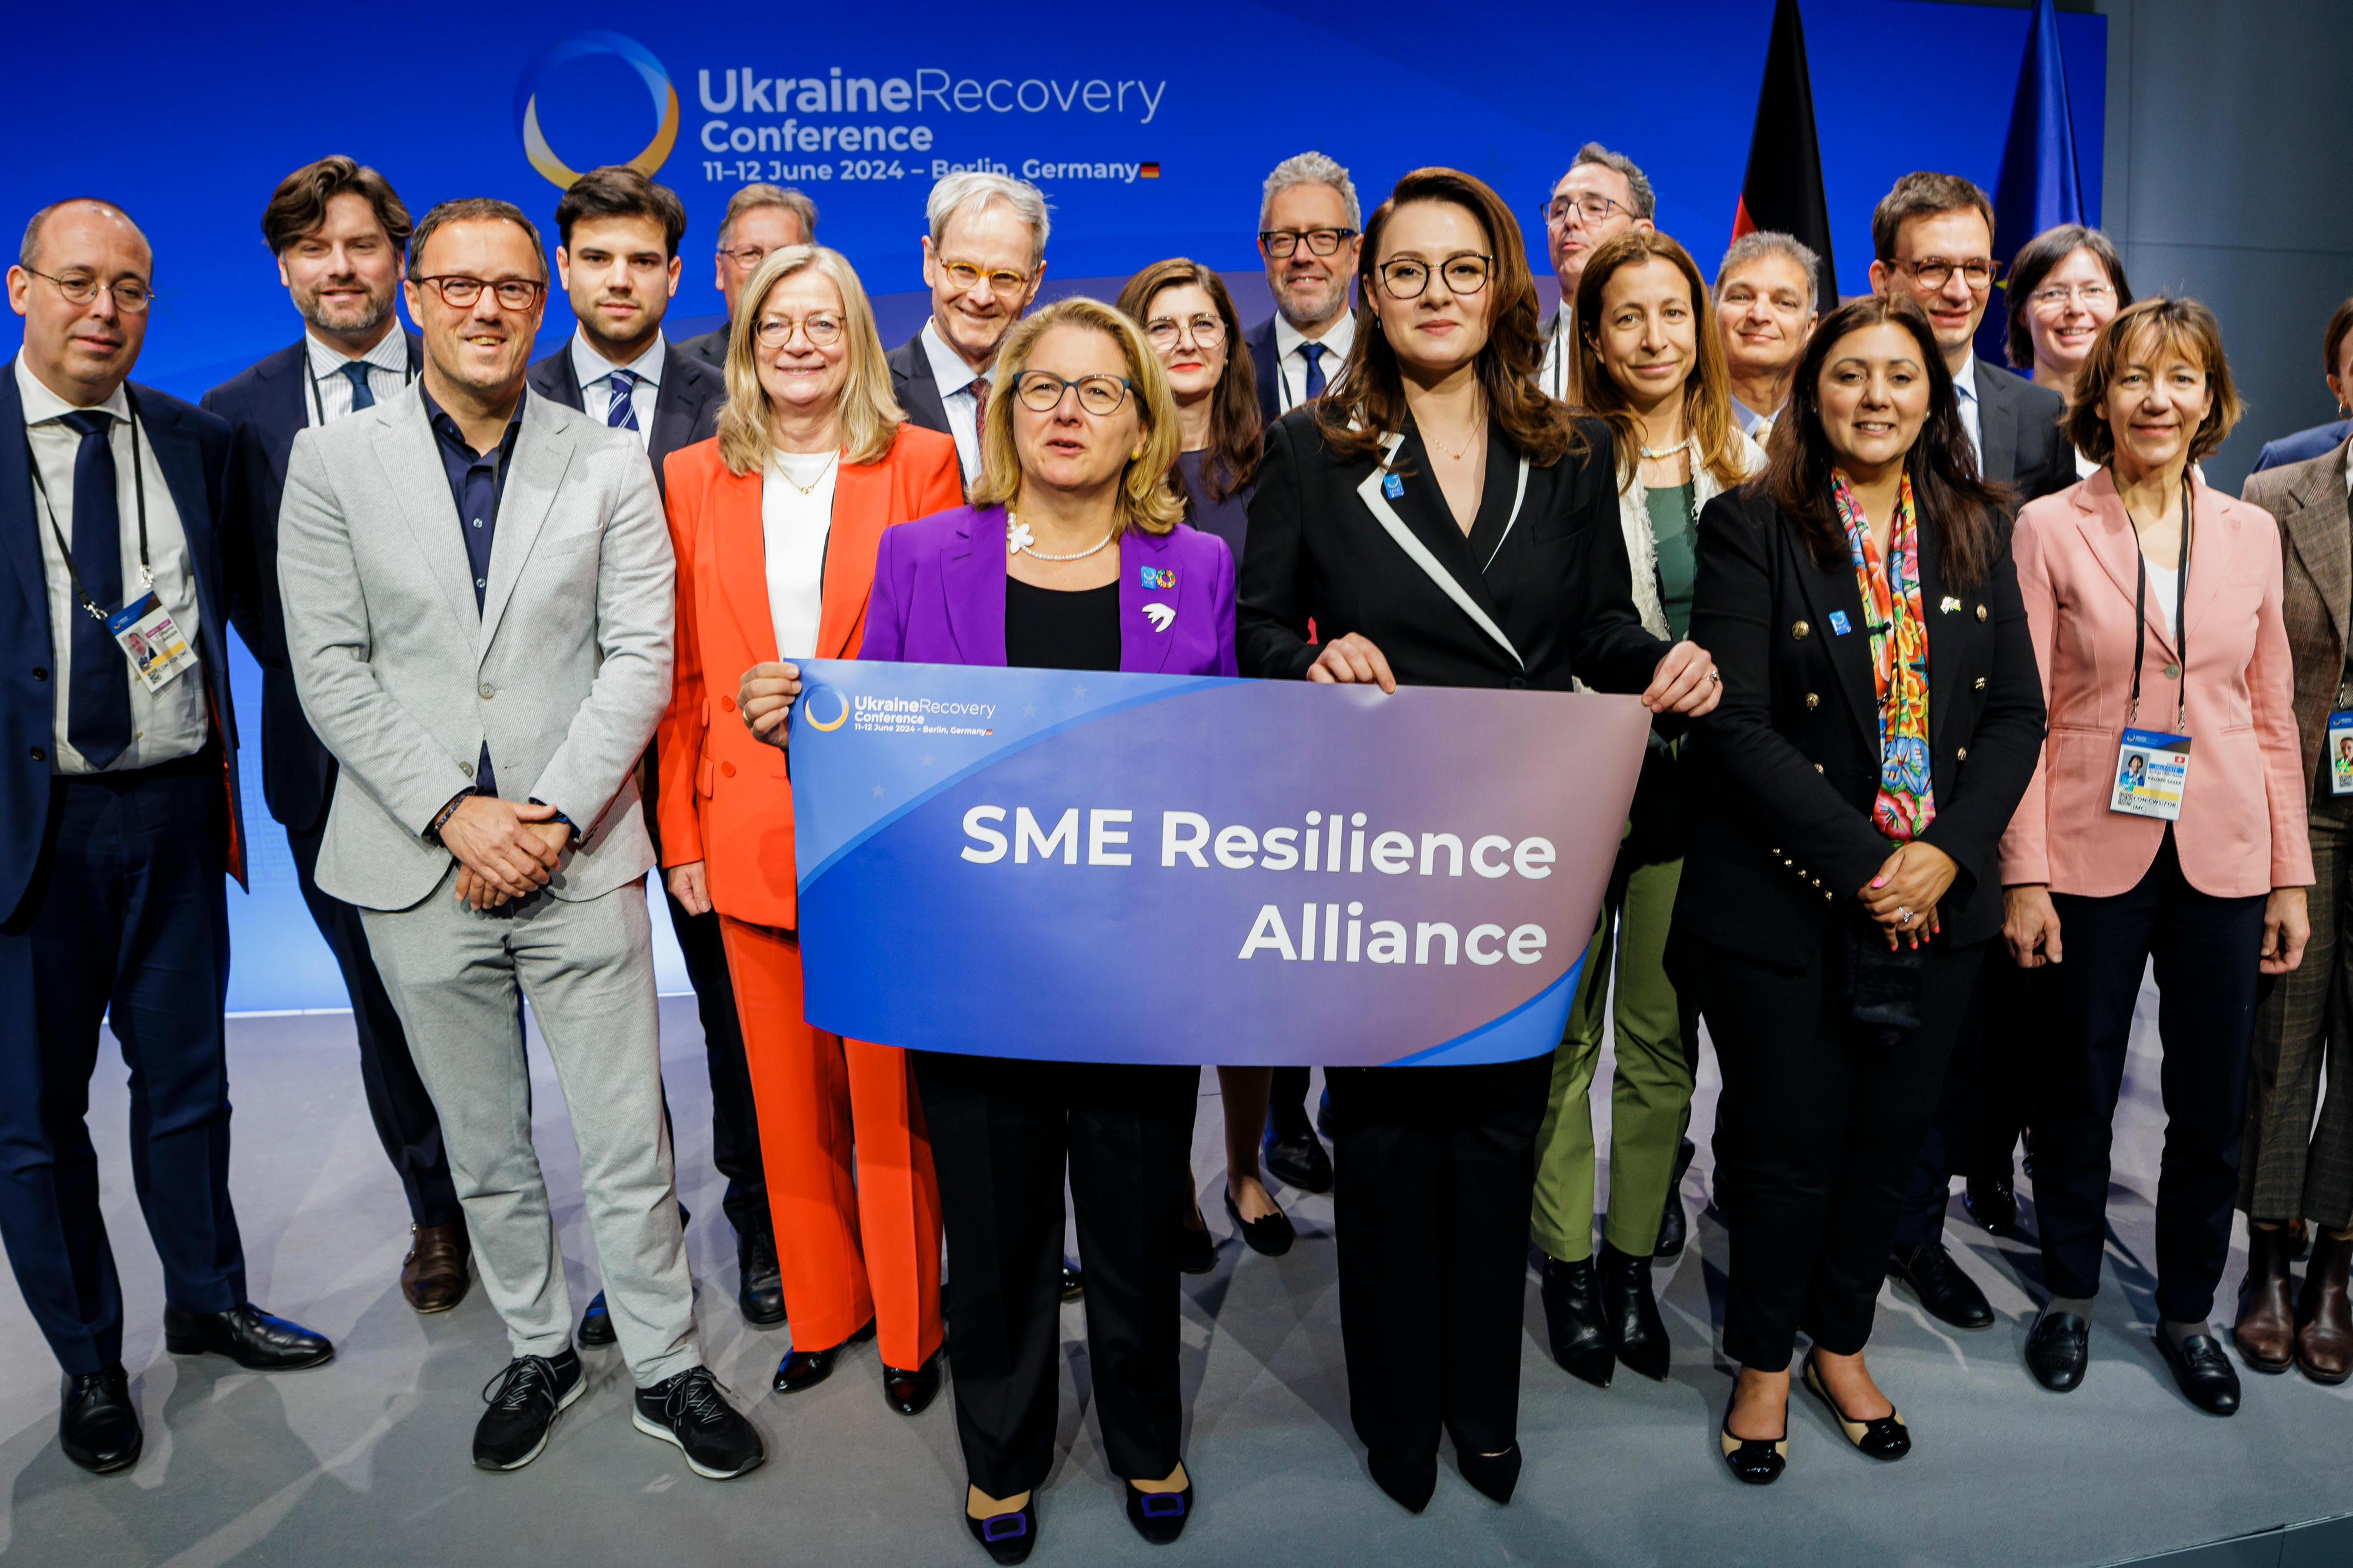 Launch of the SME Resilience Alliance at the Ukraine Recovery Conference in Berlin